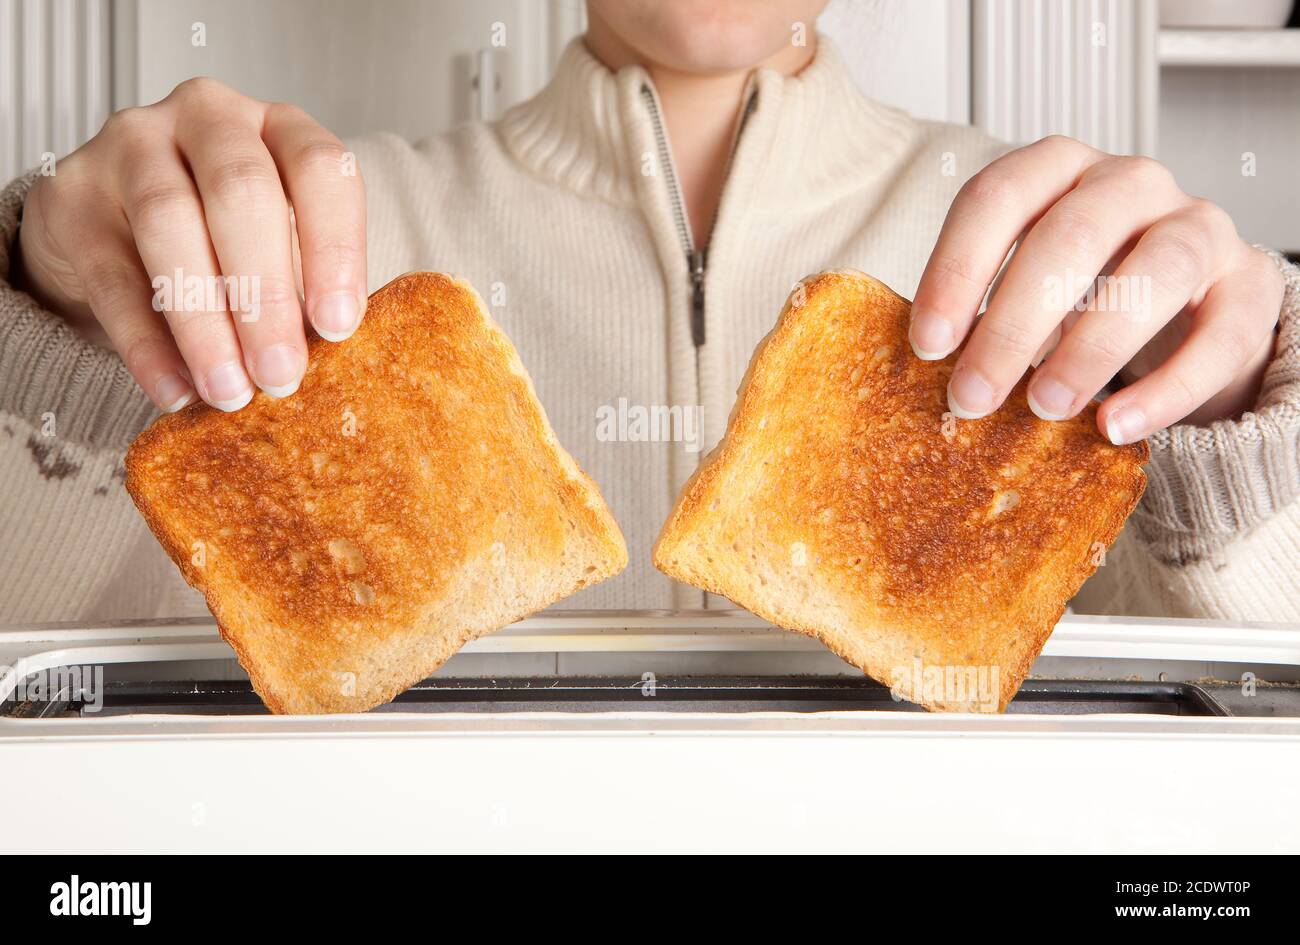 Hands of a woman taking fresh toast out of a toaster Stock Photo